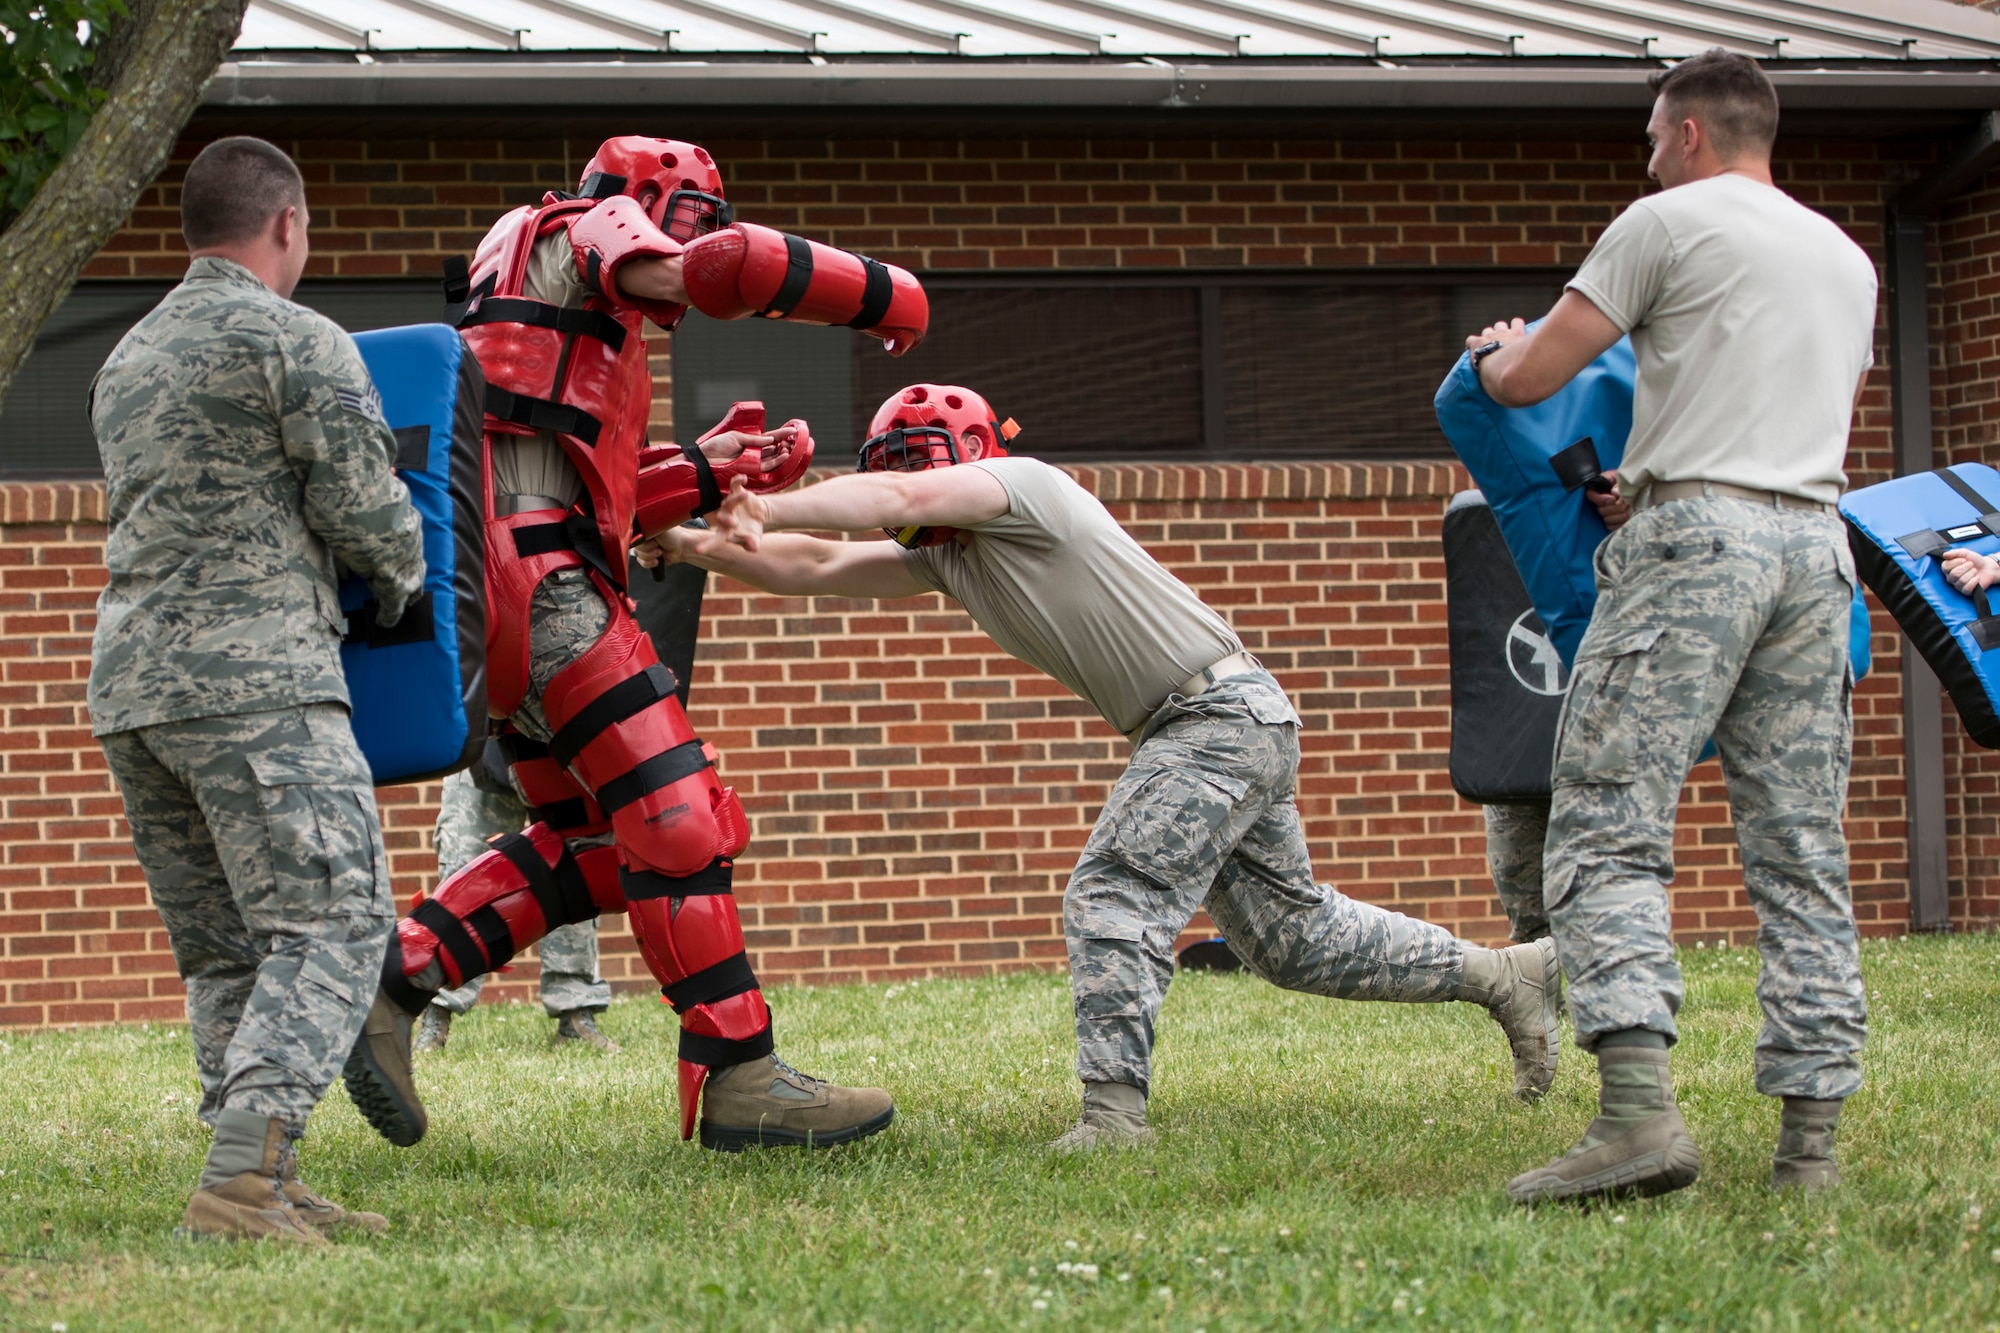 Members of the 167th Security Forces participated in “Redman” training in front of the dining facilityat the 167th Airlift WIng, martinsburg, W.Va.,  June 7, 2019. During the training, security forces members practiced striking and blocking against the “Redman.” (U.S. Air National Guard photo by Tech. Sgt. Jodie Witmer)